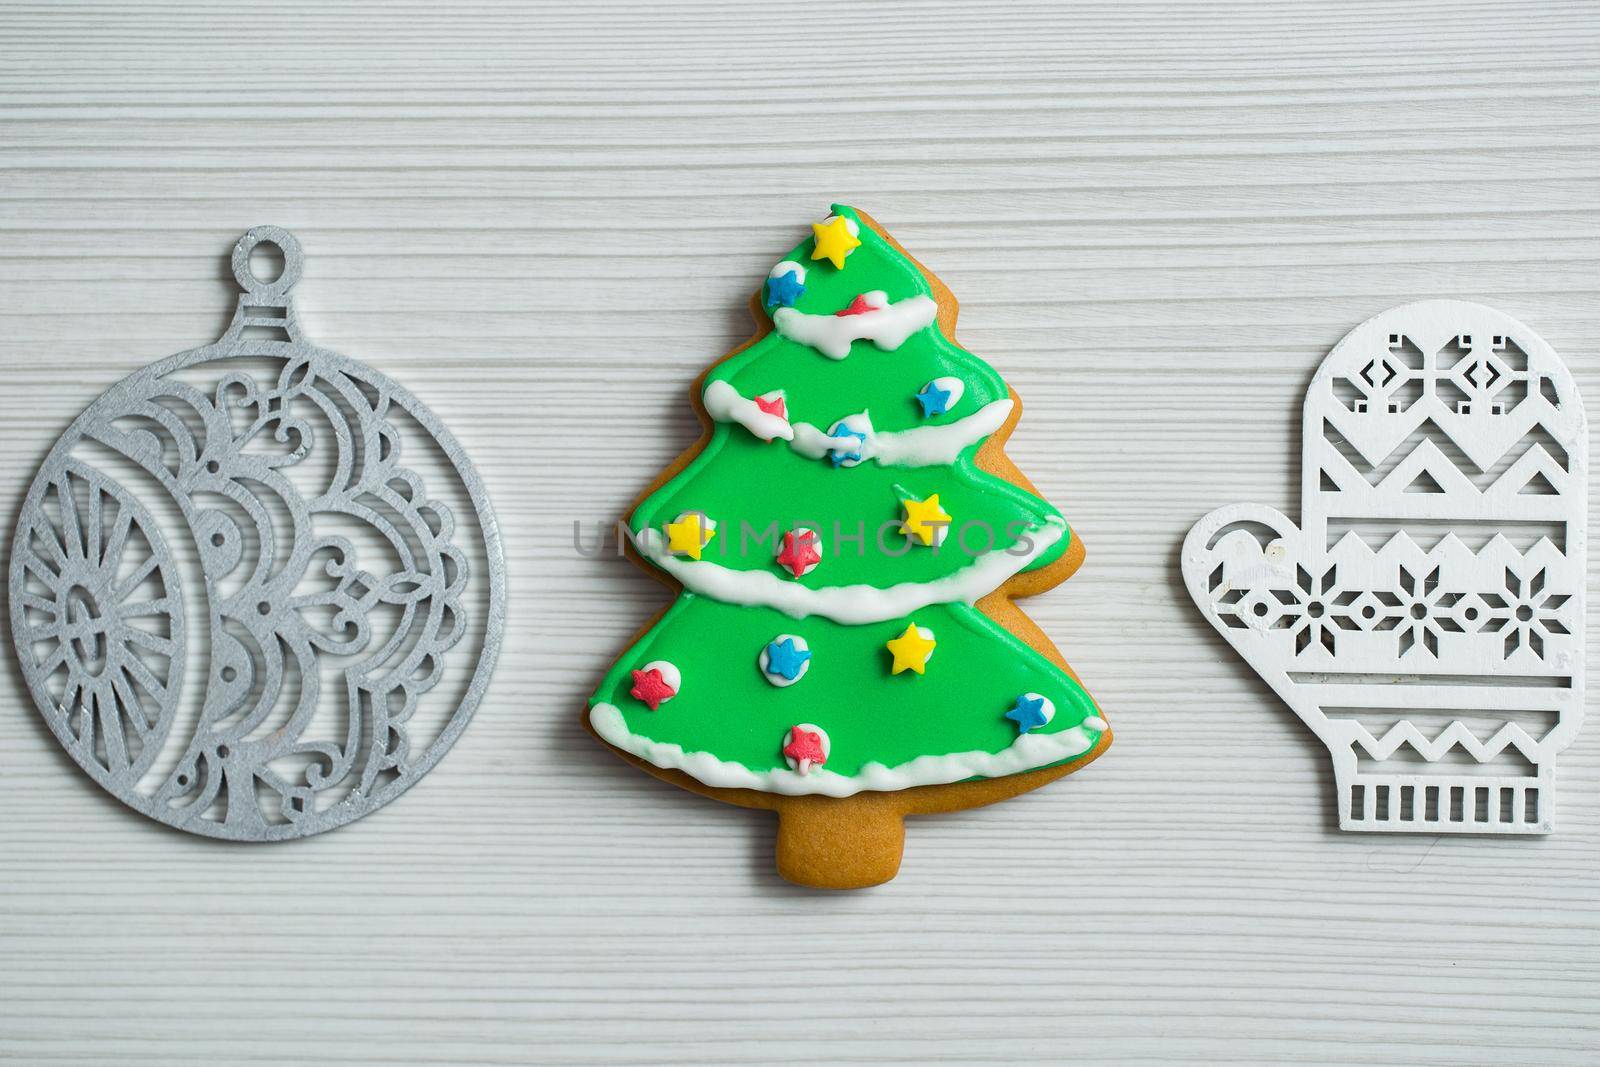 Christmas, new years decor on a wooden white background. Gingerbread mitten, a ball, lump, nut.